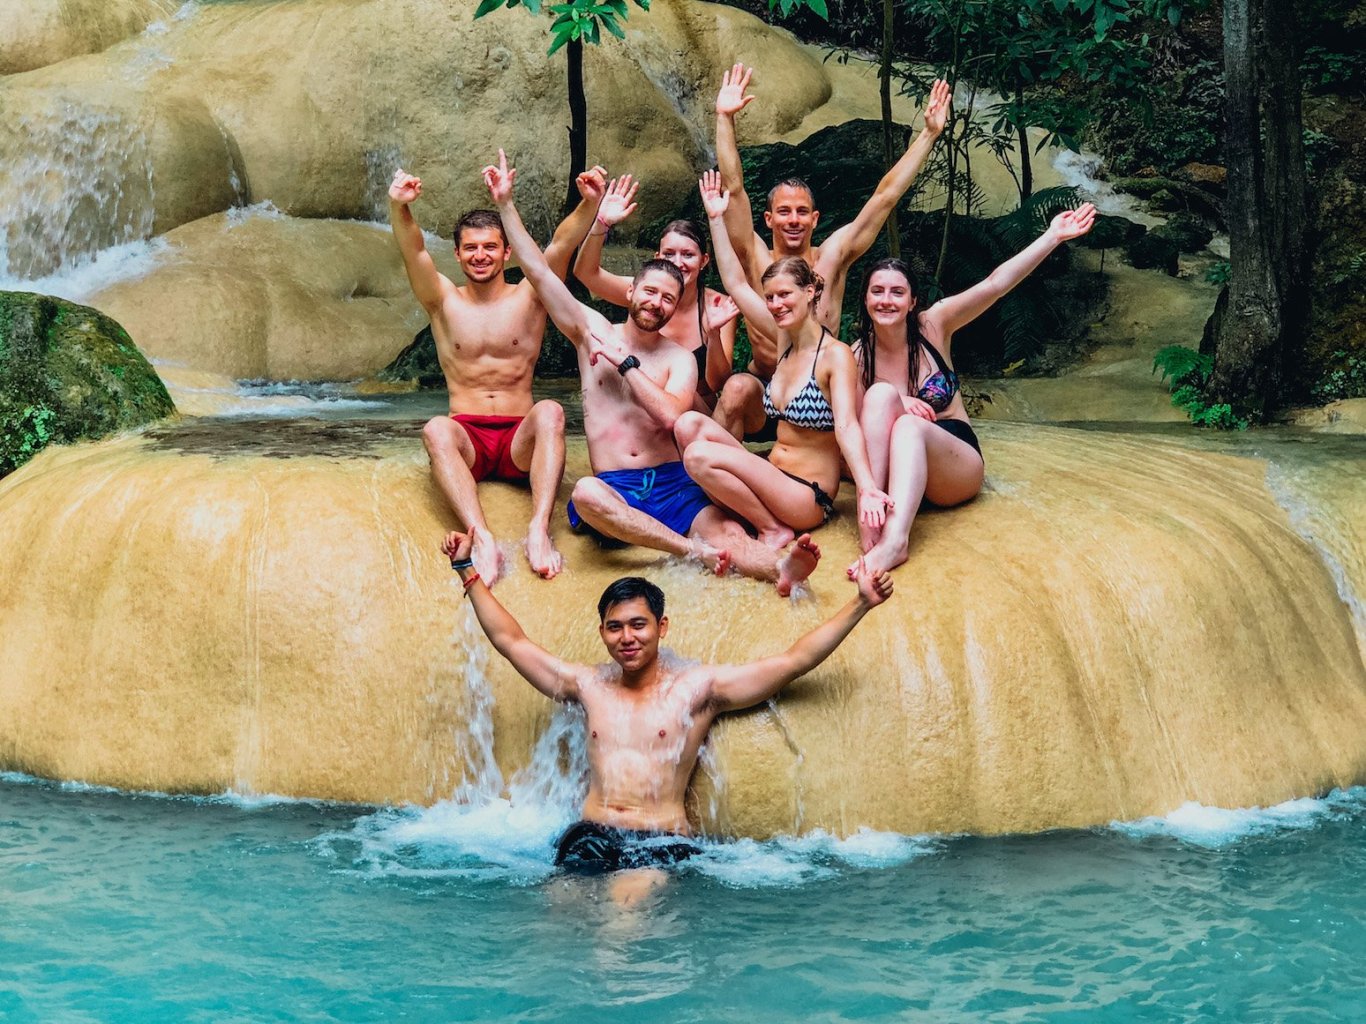 Group photo - waterfall - Northern Thailand